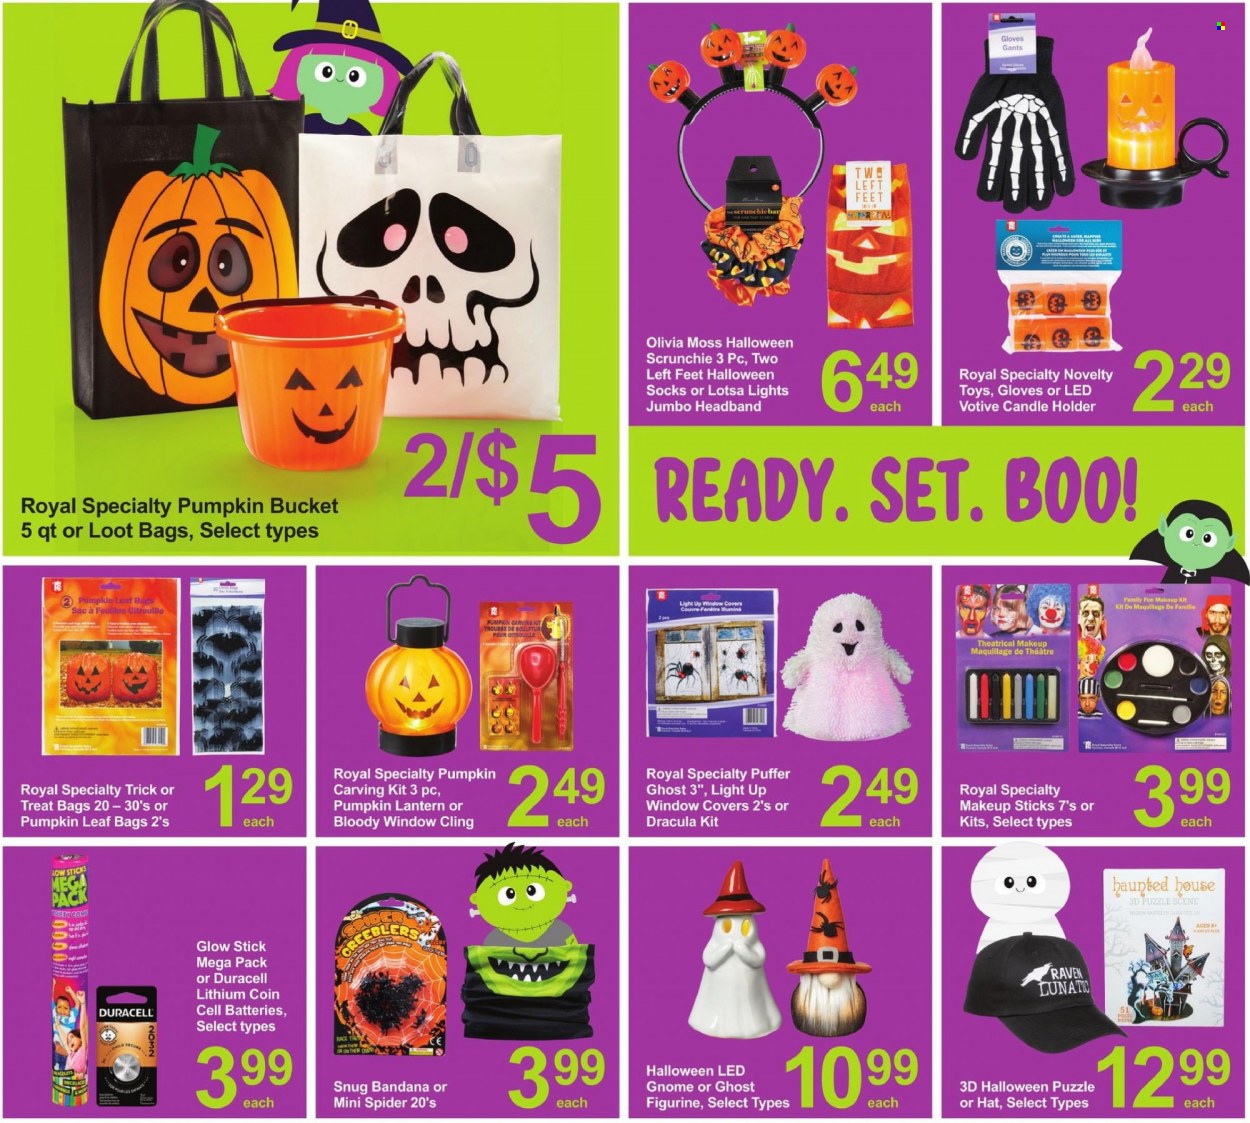 thumbnail - Pharmasave Flyer - October 15, 2021 - October 21, 2021 - Sales products - pumpkin, bag, makeup, candle holder, gloves, candle, Duracell, socks, hat, Snug, toys, Halloween, puzzle. Page 6.